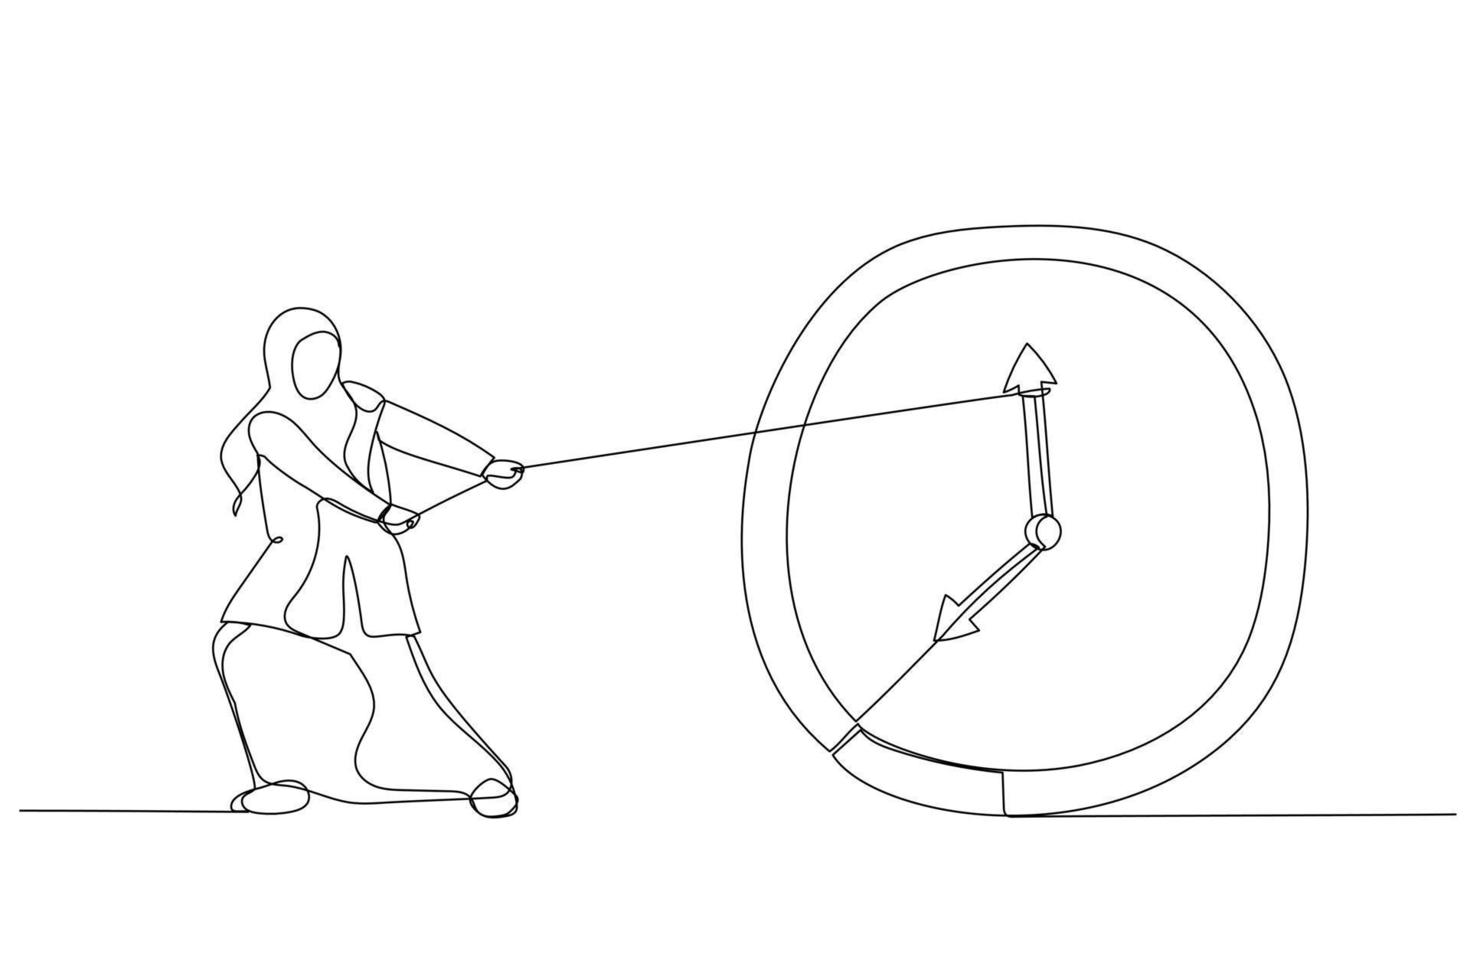 Drawing of muslim businesswoman trying to slow down and stop time. Stopping time metaphor. Single line art style vector